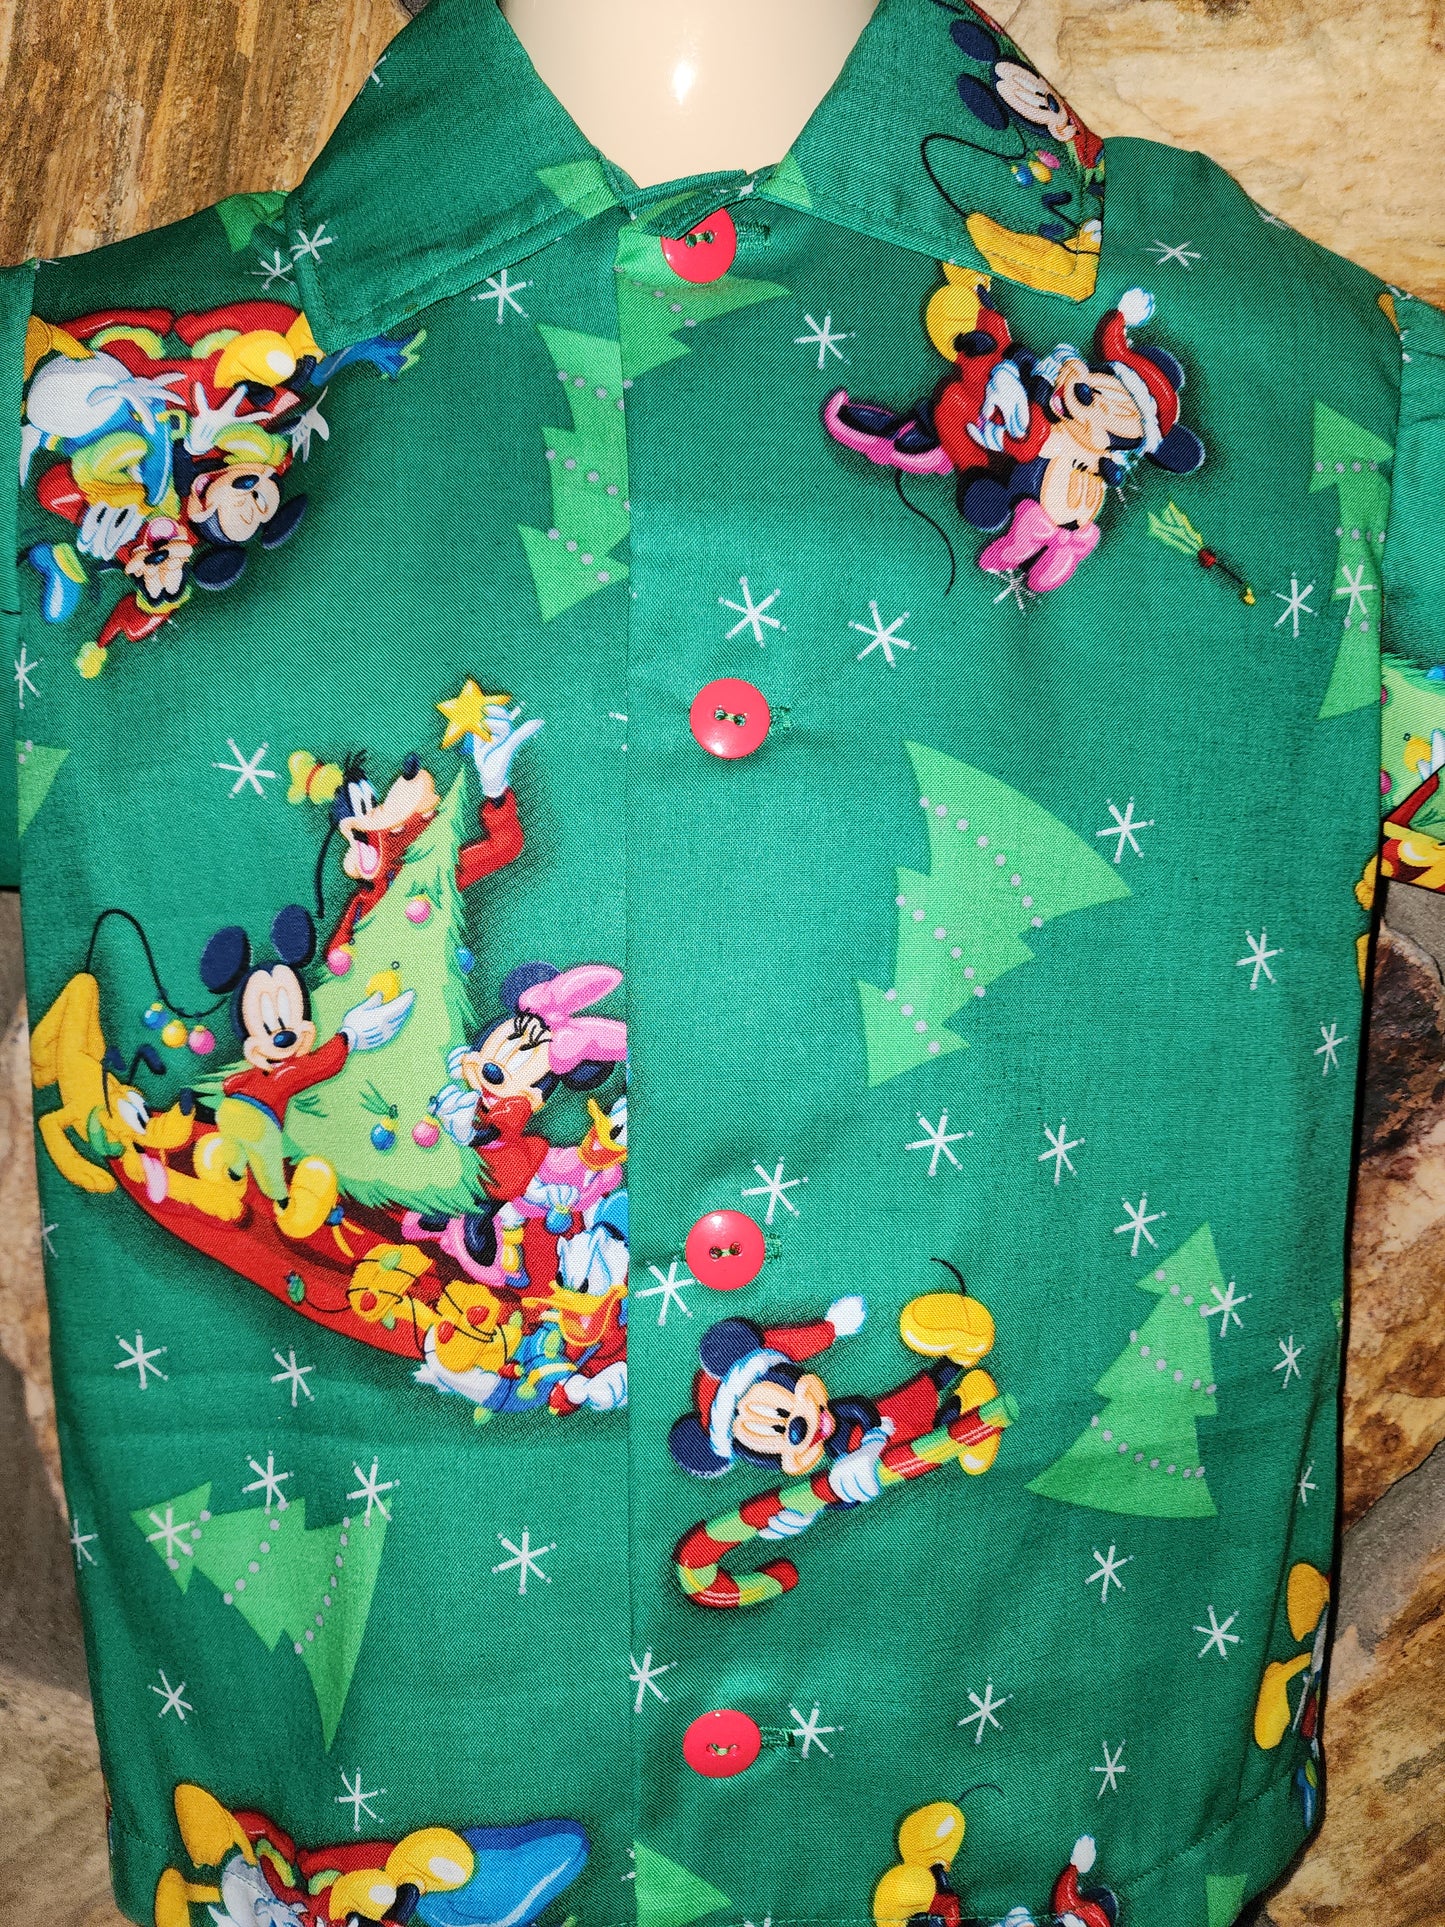 Mickey and Friends Christmas Shirt